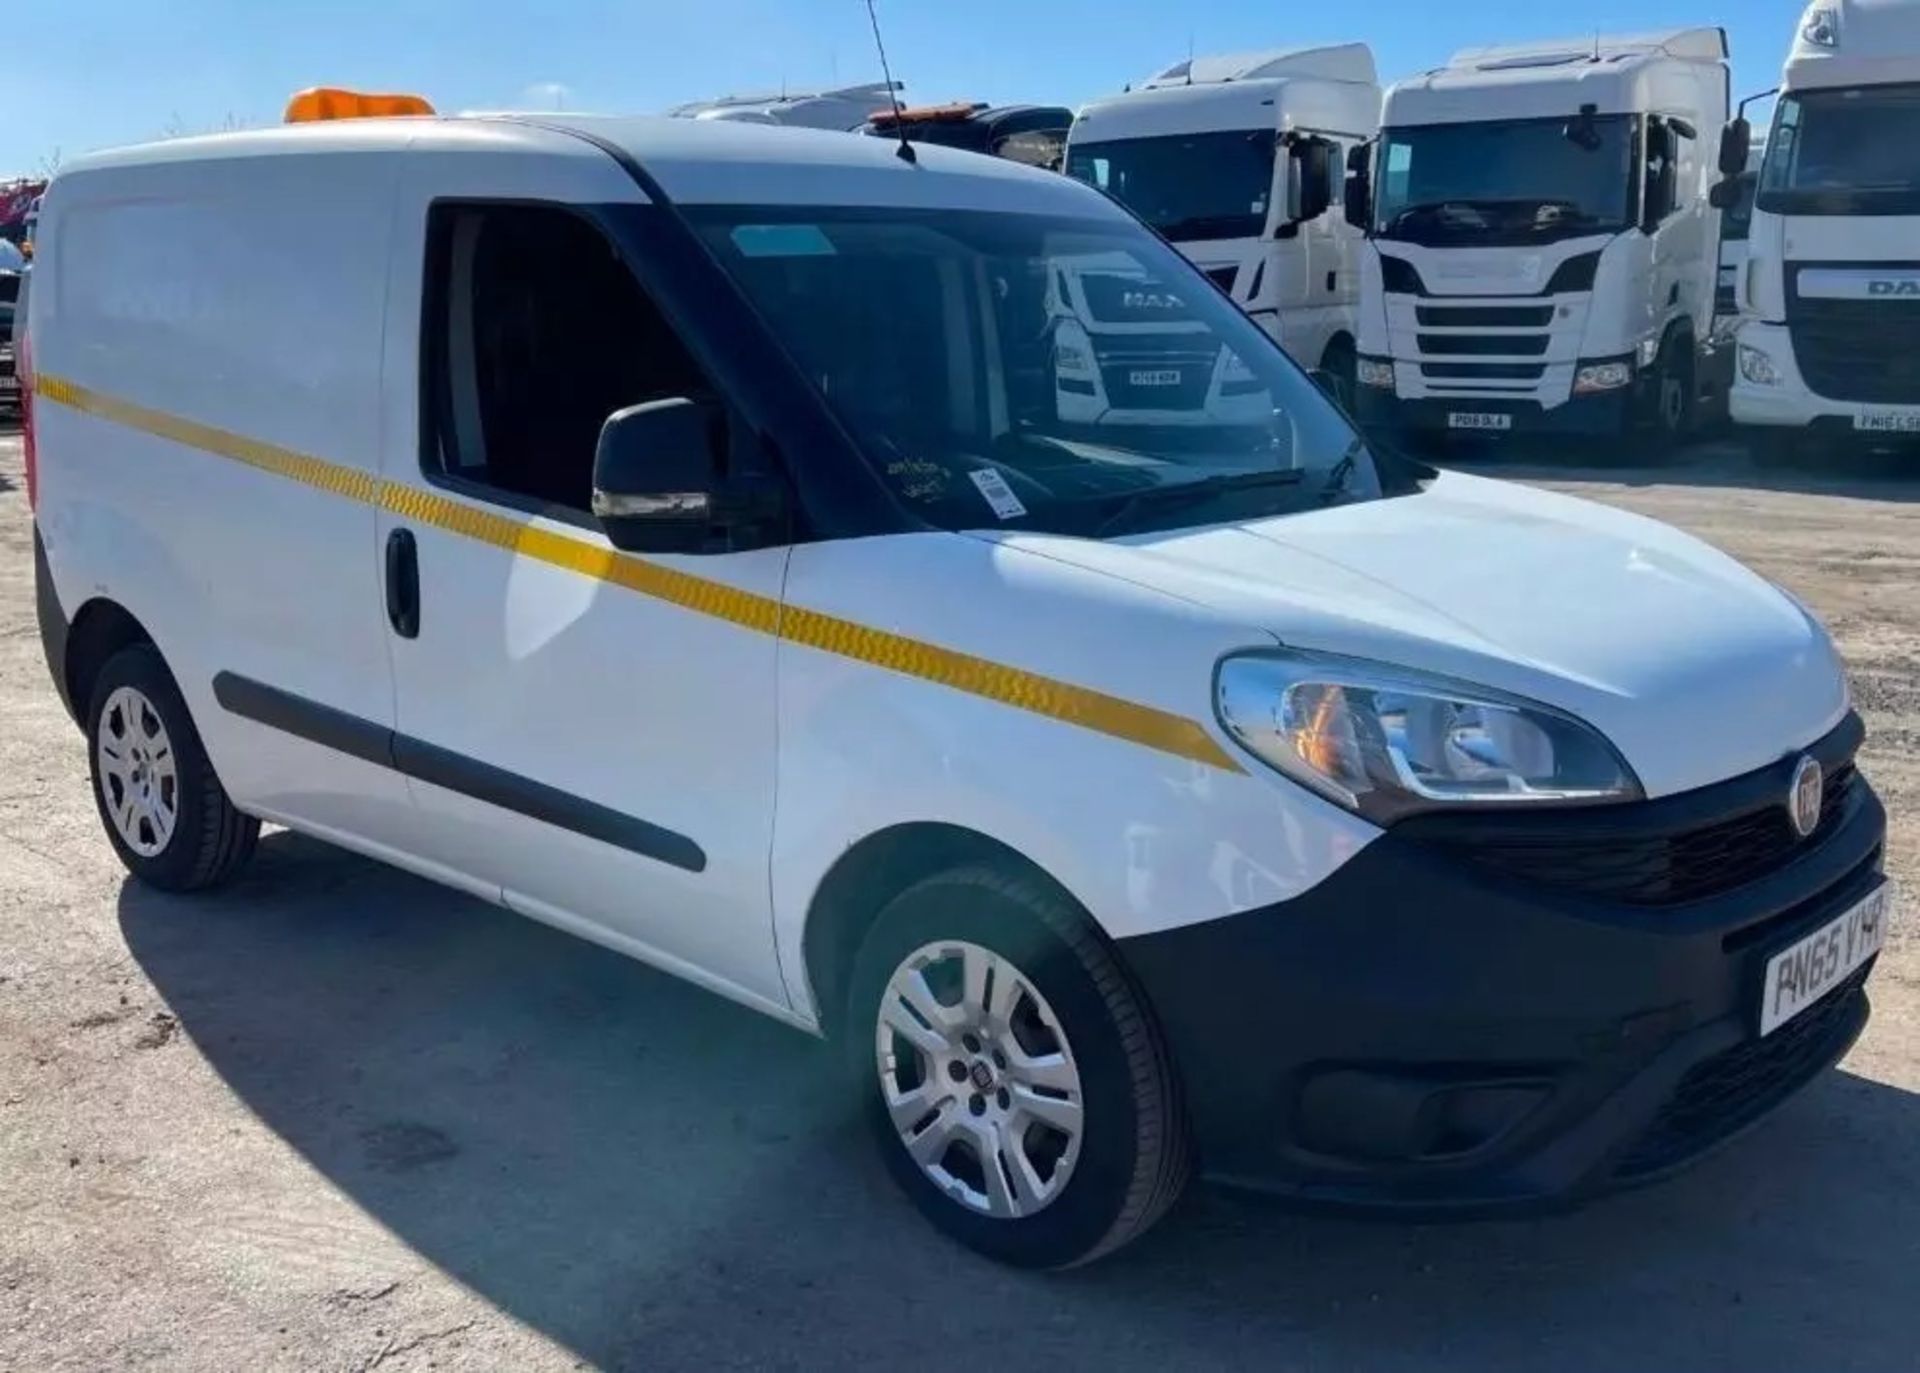 2015 FIAT DOBLO HDI PANEL VAN - RELIABLE FLEET VEHICLE, READY FOR WORK - Image 11 of 13